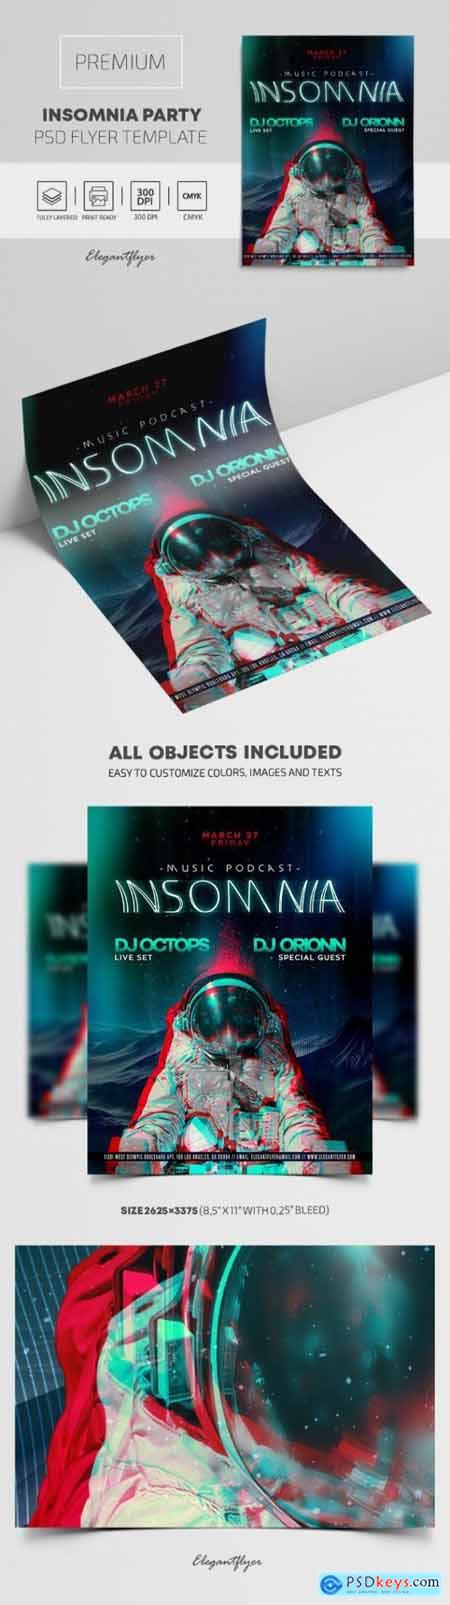 Insomnia Party  Premium PSD Flyer Template